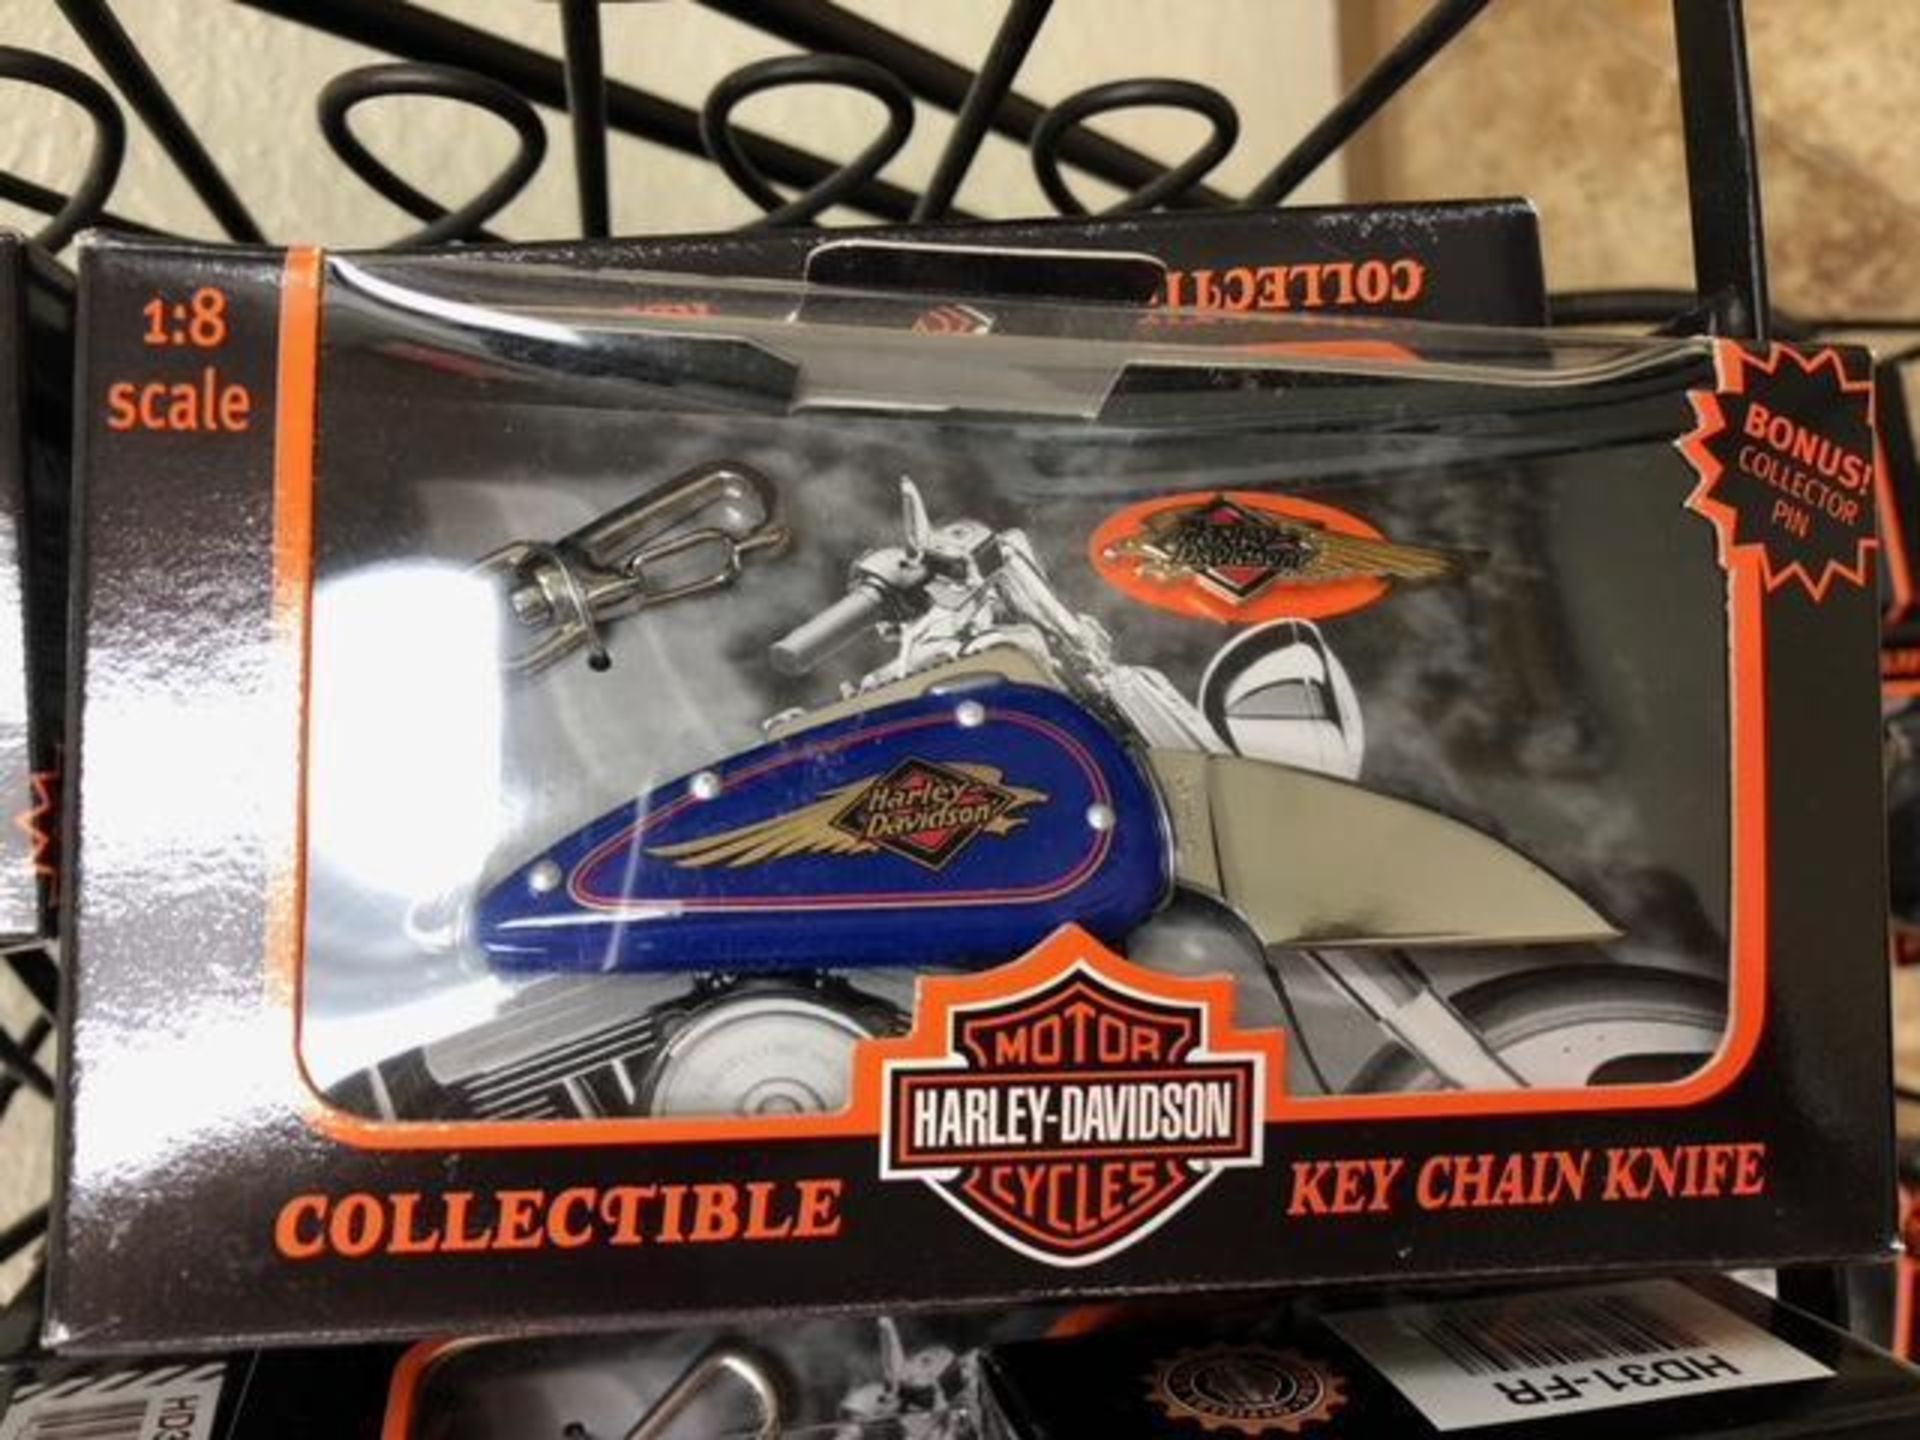 20 NEW ASSORTED COLLECTIBLE HARLEY DAVIDSON KEY CHAIN KNIVES - Image 2 of 2